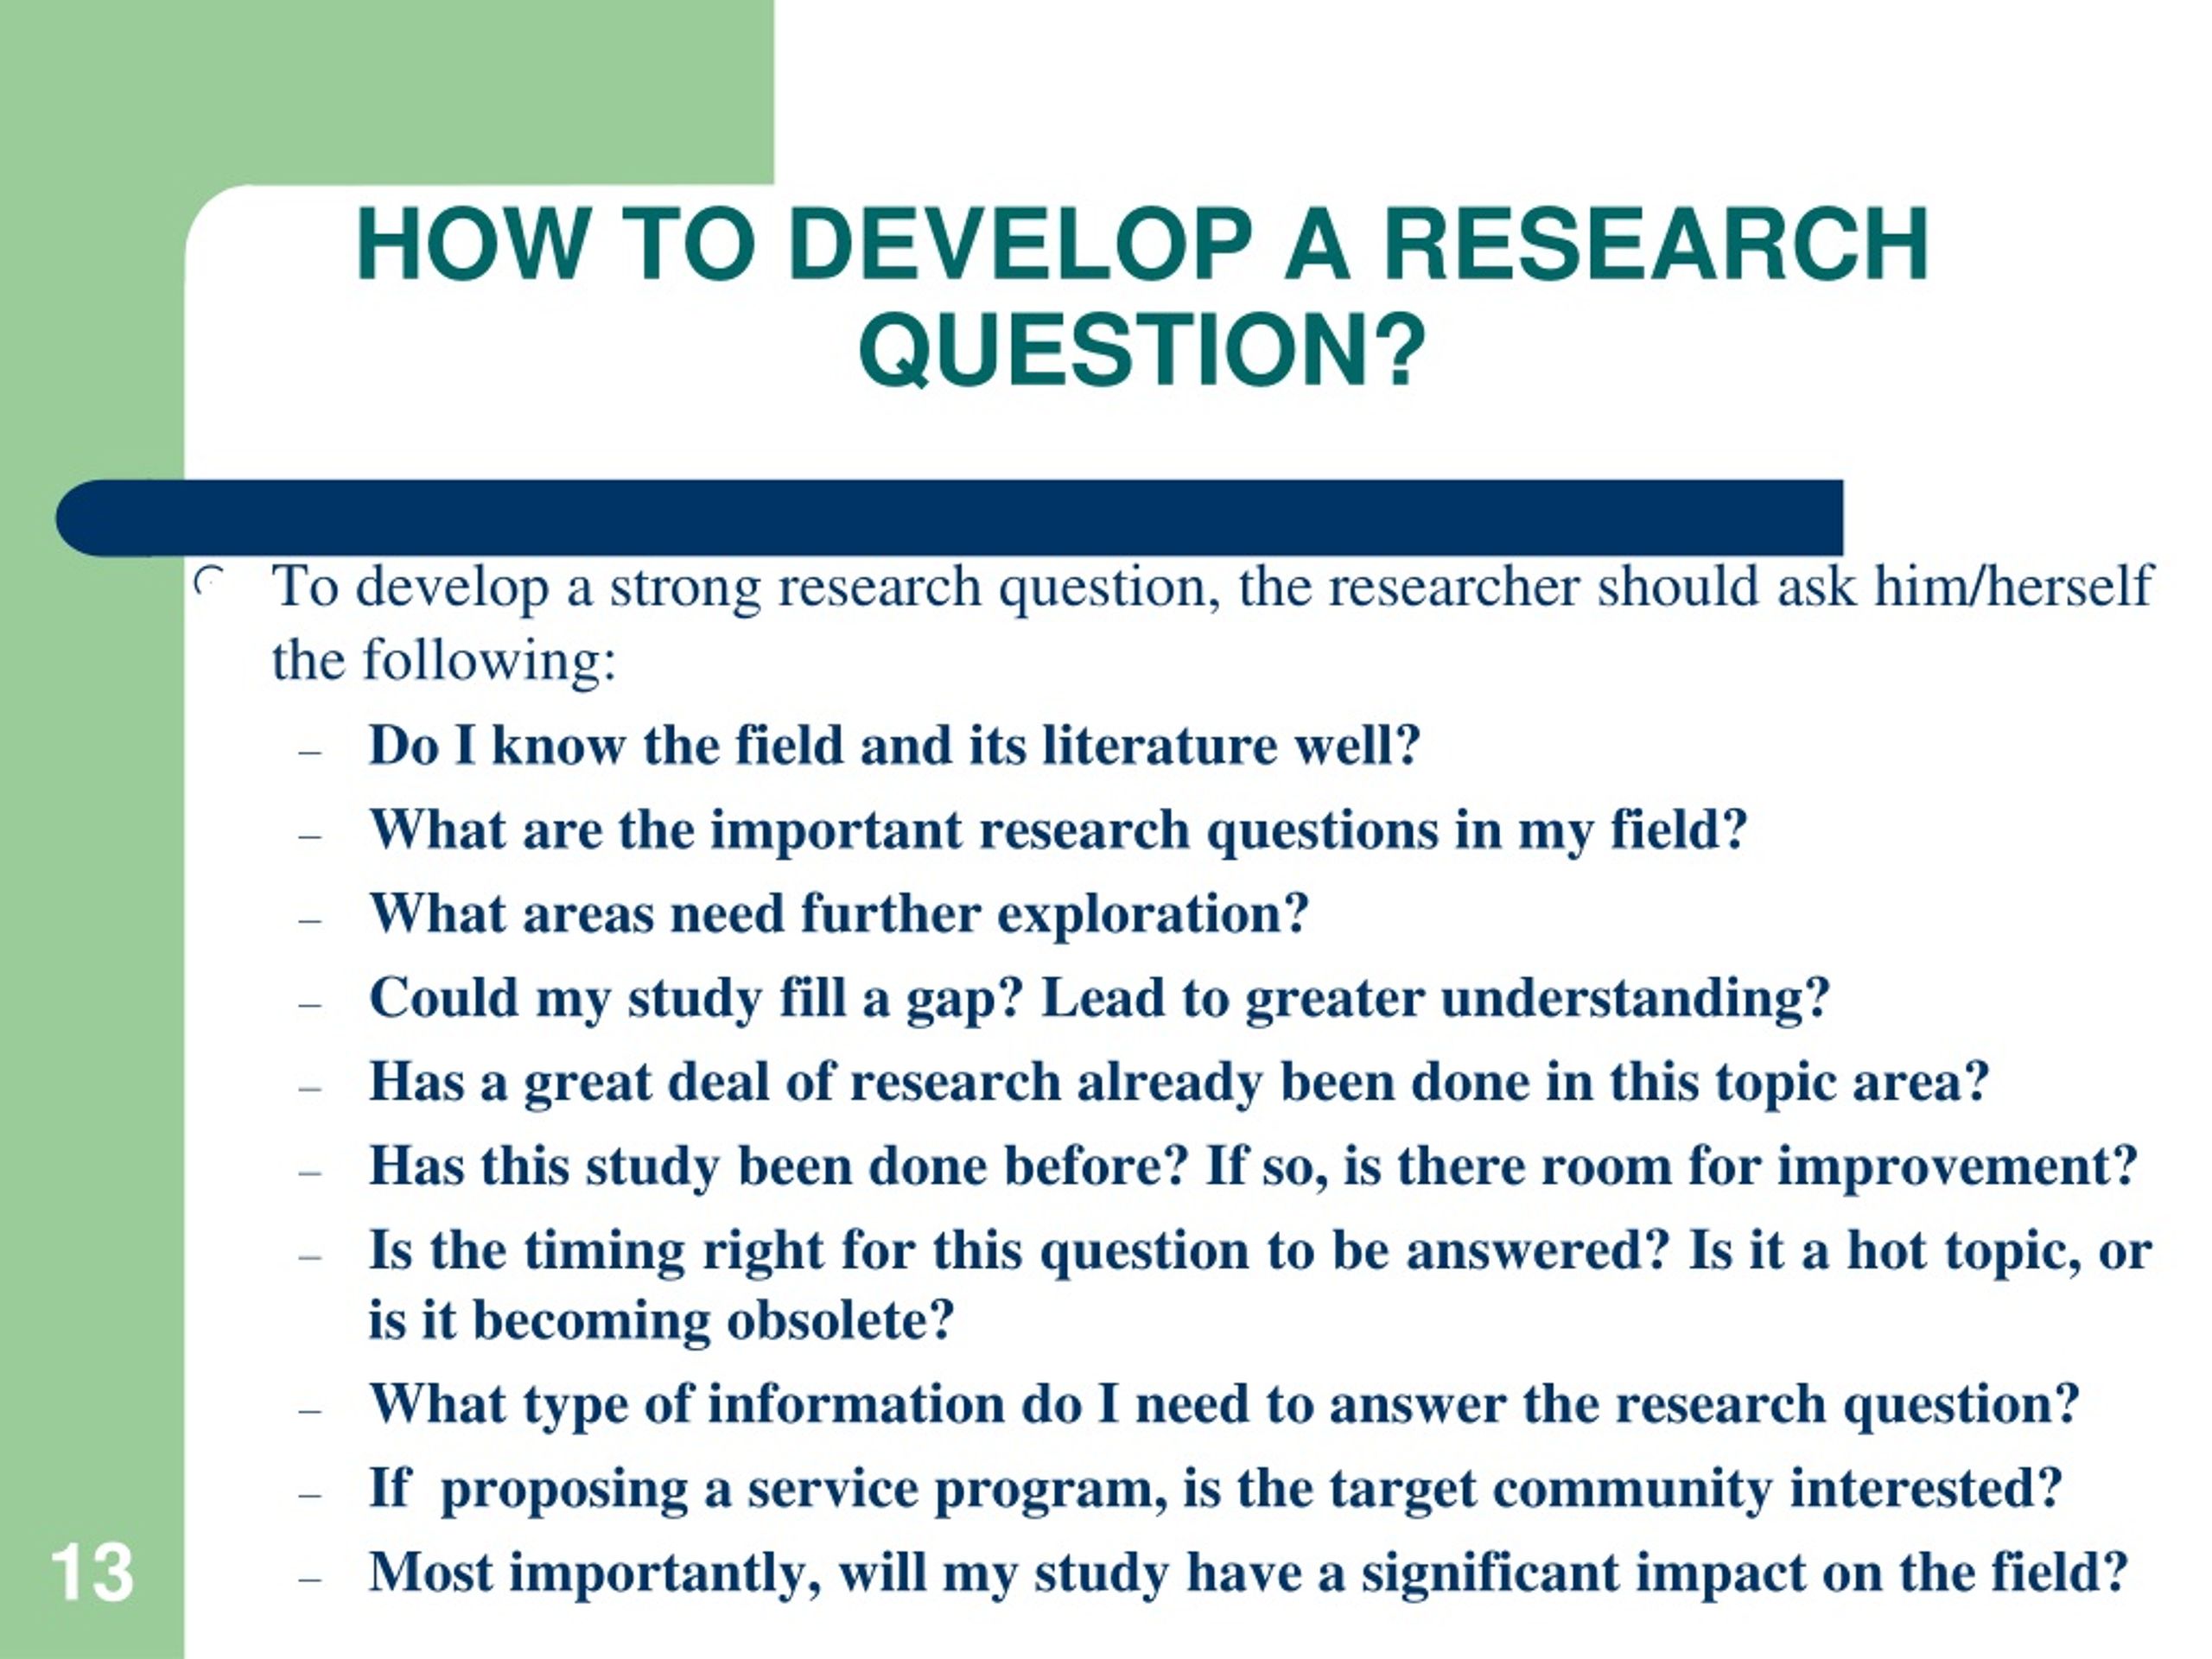 a research question becomes significant when